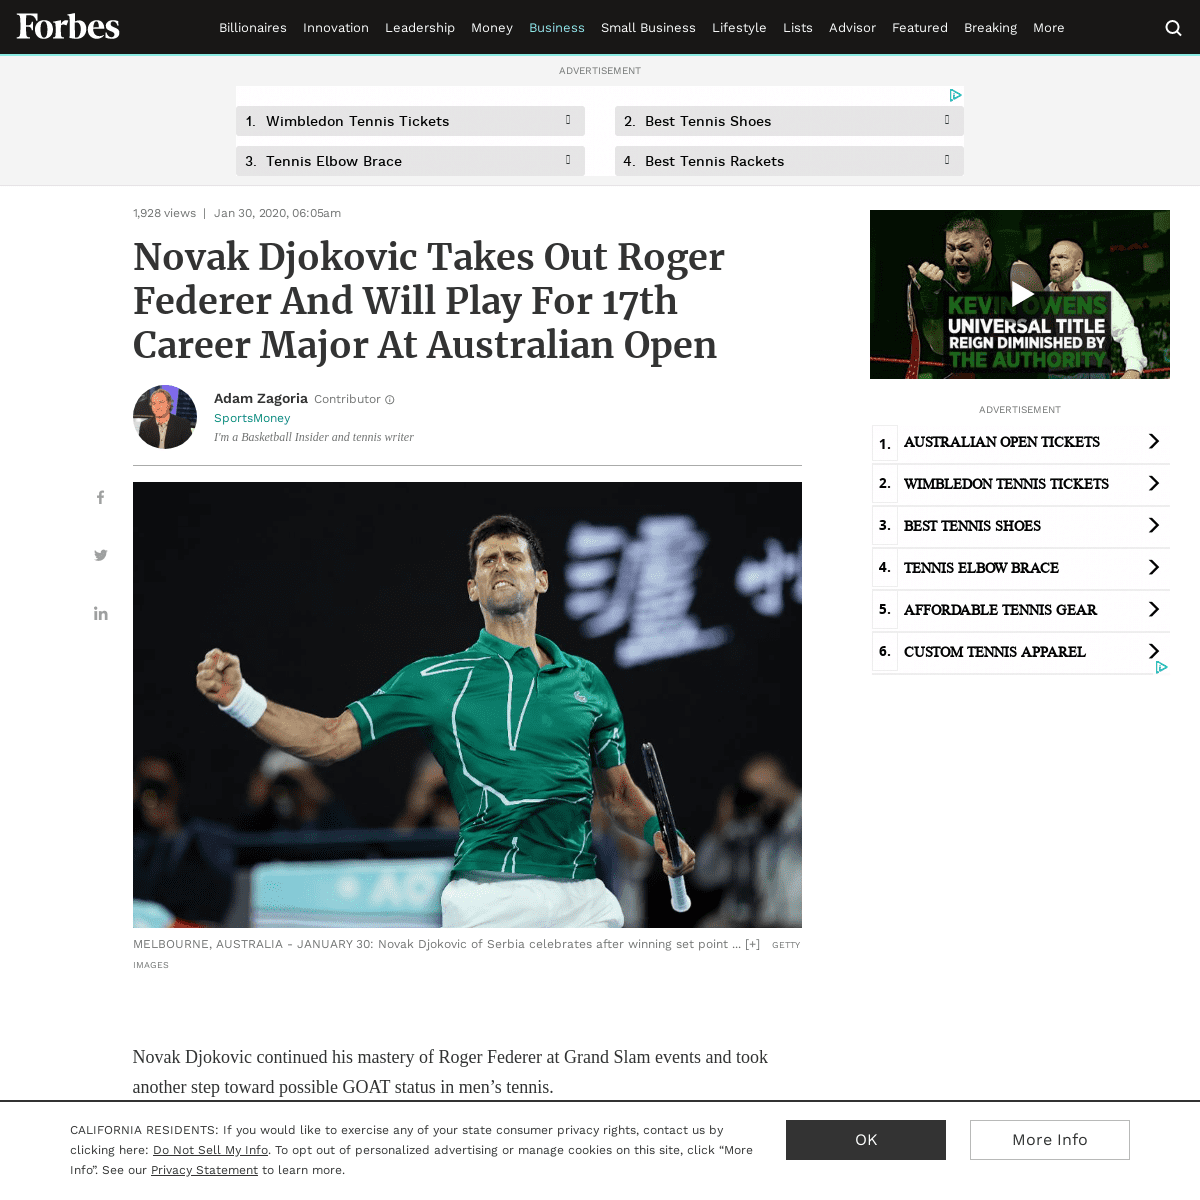 A complete backup of www.forbes.com/sites/adamzagoria/2020/01/30/novak-djokovic-takes-out-roger-federer-and-will-play-for-17th-c